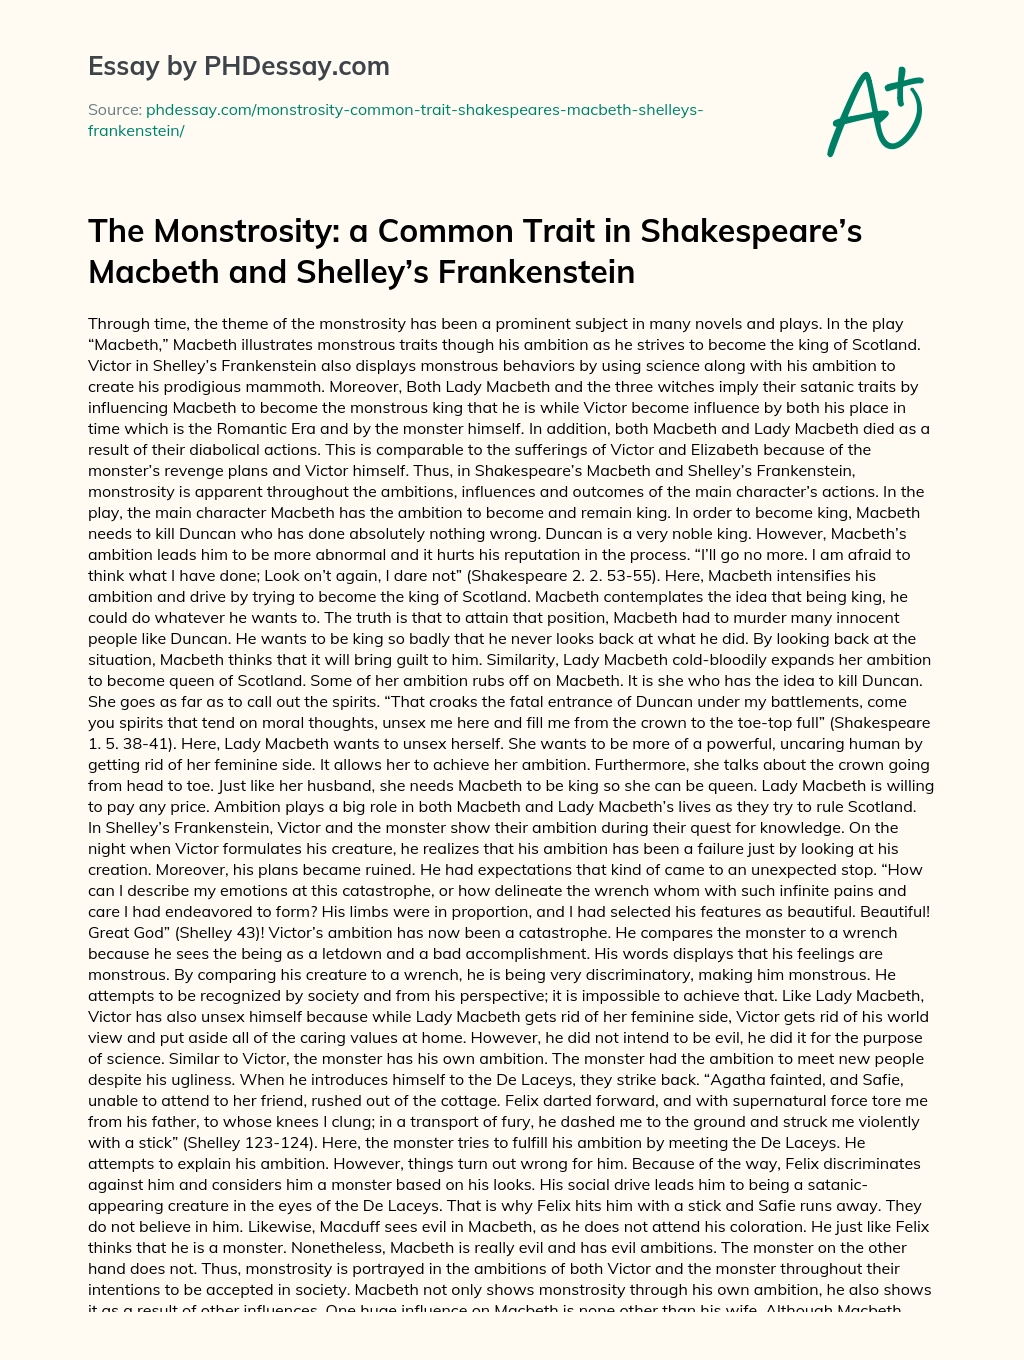 The Monstrosity: a Common Trait in Shakespeare’s Macbeth and Shelley’s Frankenstein essay